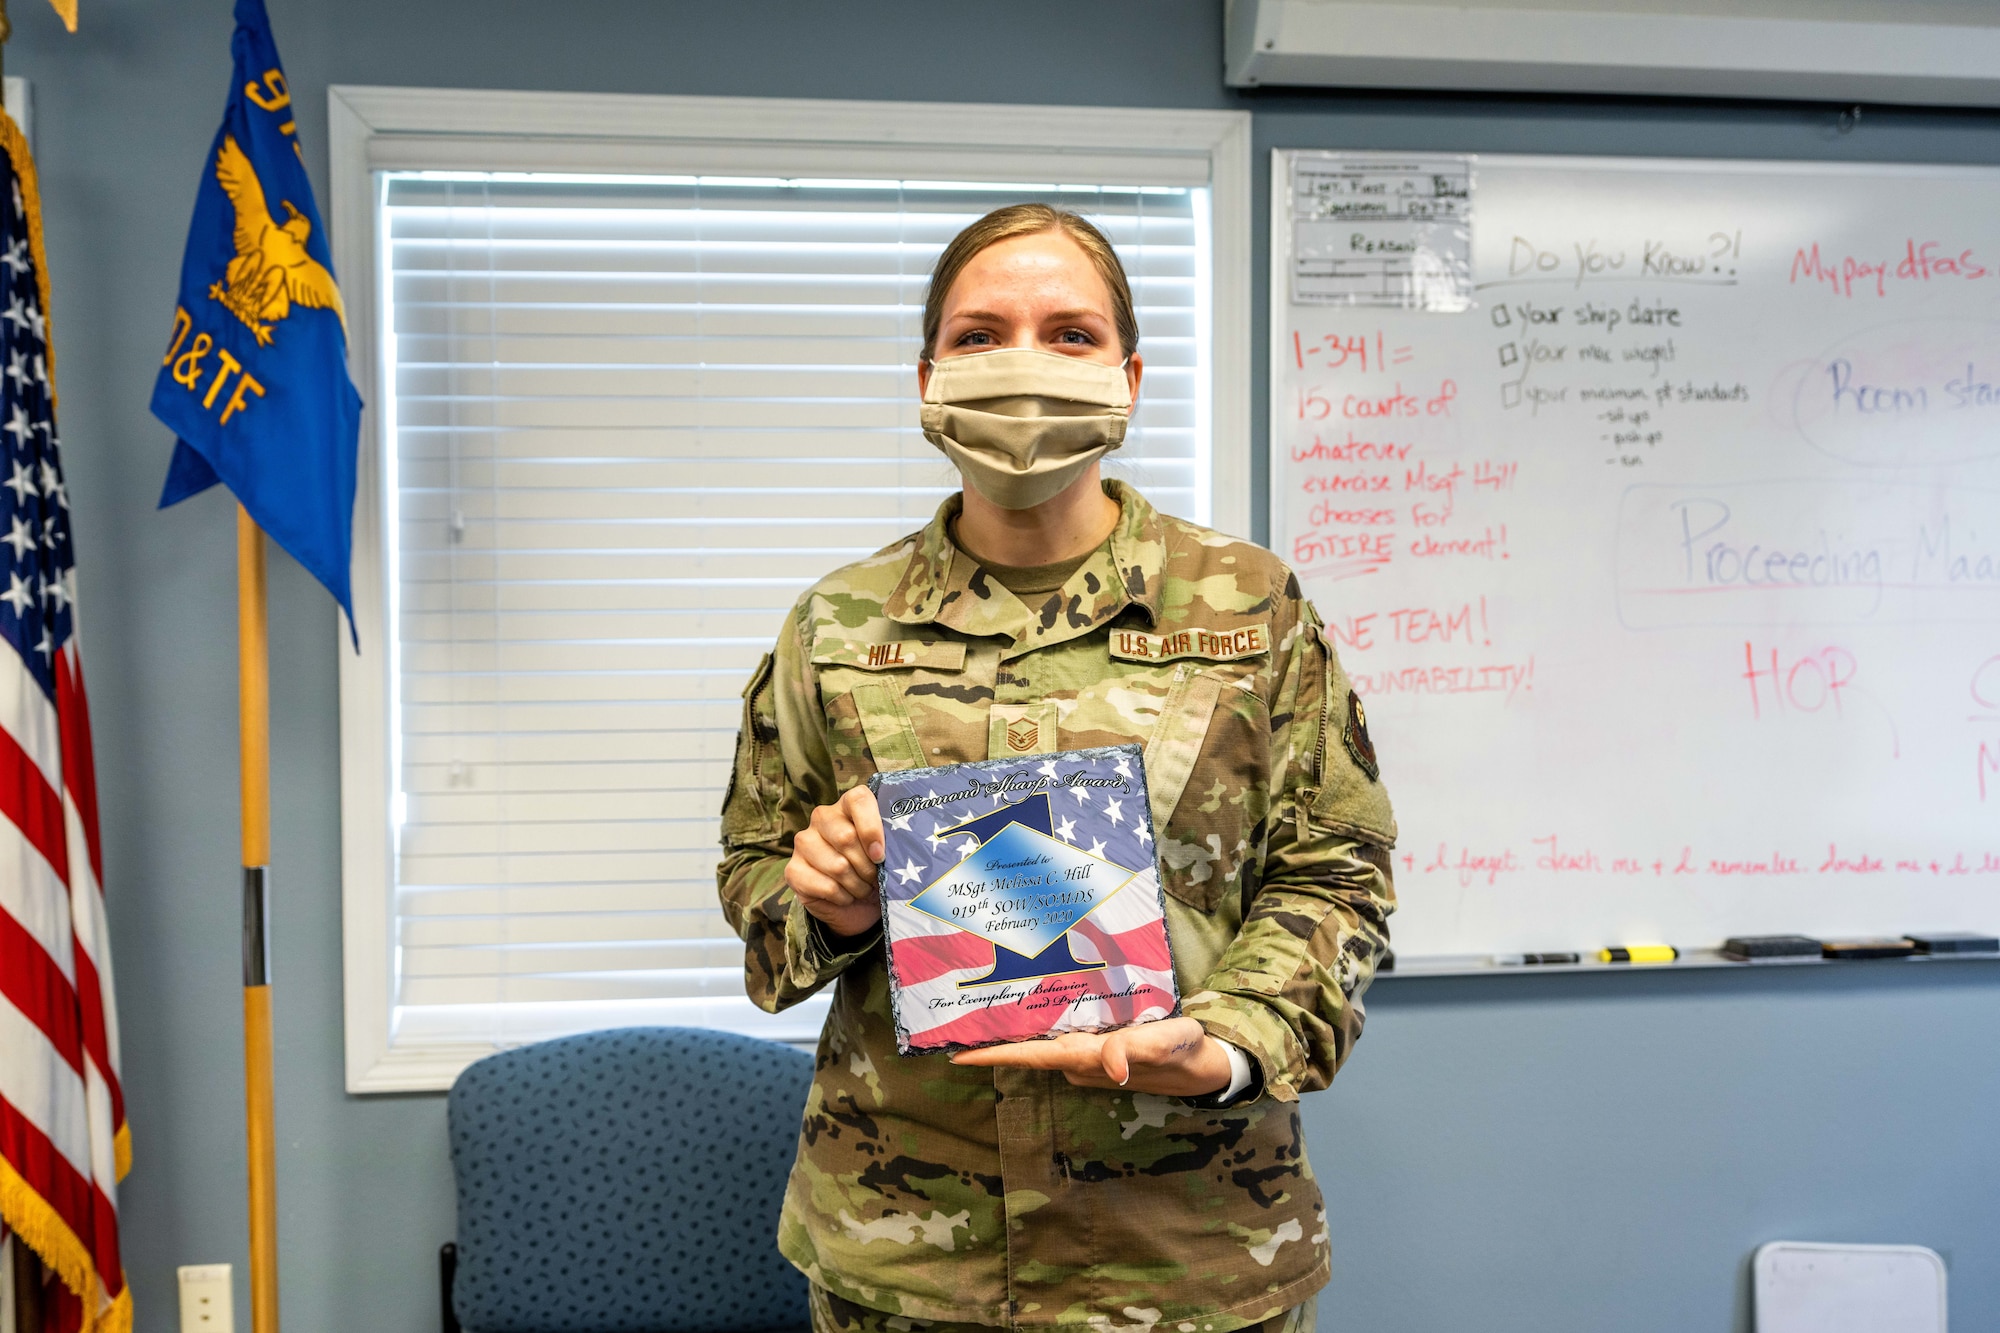 Airman stands with award